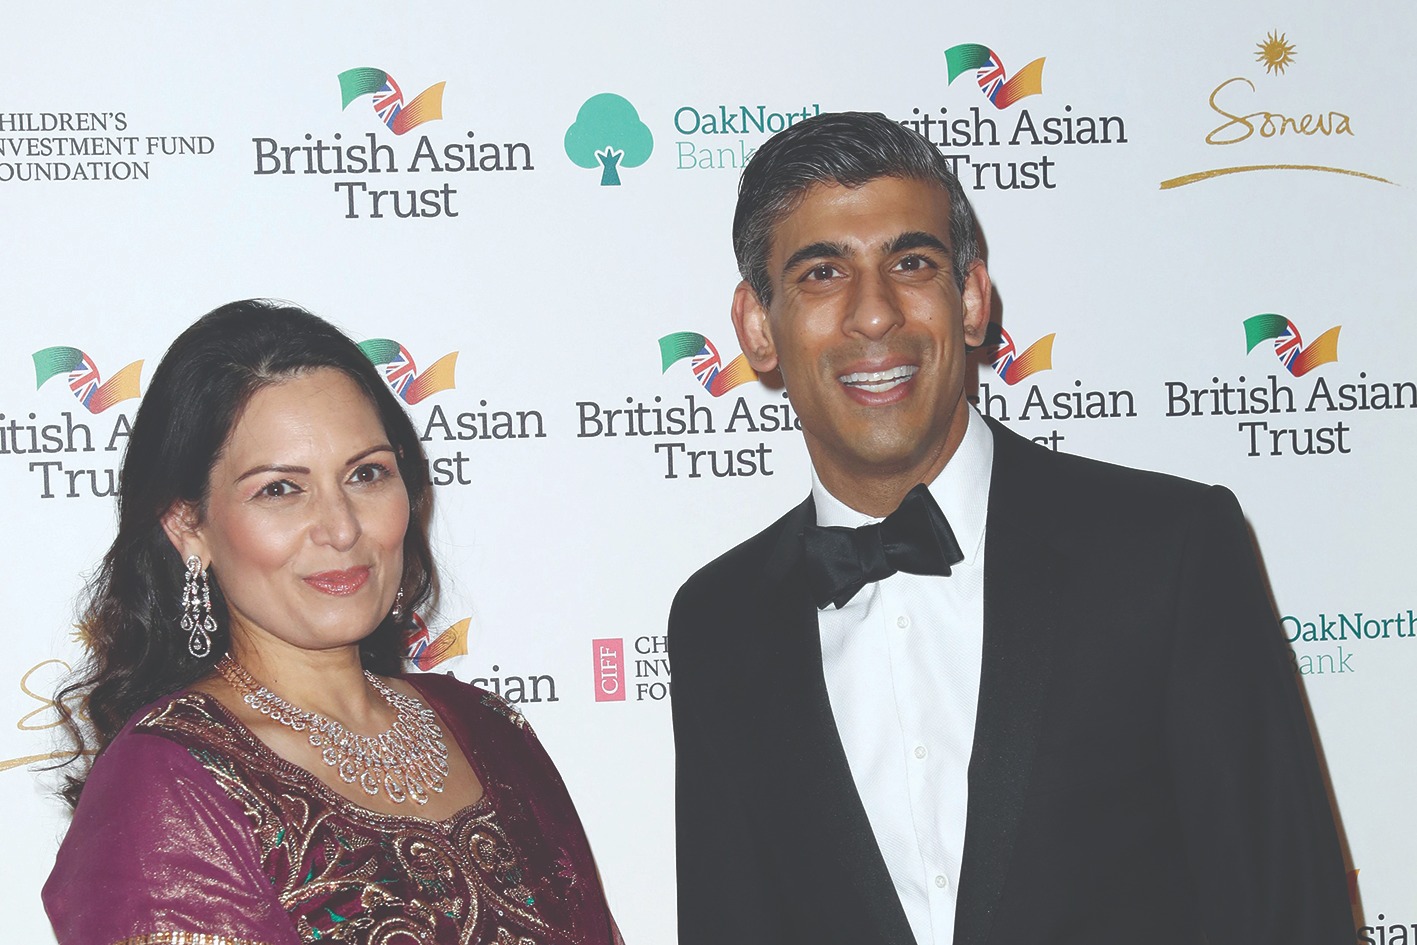 LONDON: Britain's Home Secretary Priti Patel (L) and Britain's Chancellor of the Exchequer Rishi Sunak pose for pictures during a reception to celebrate the British Asian Trust at The British Museum in London. - AFP